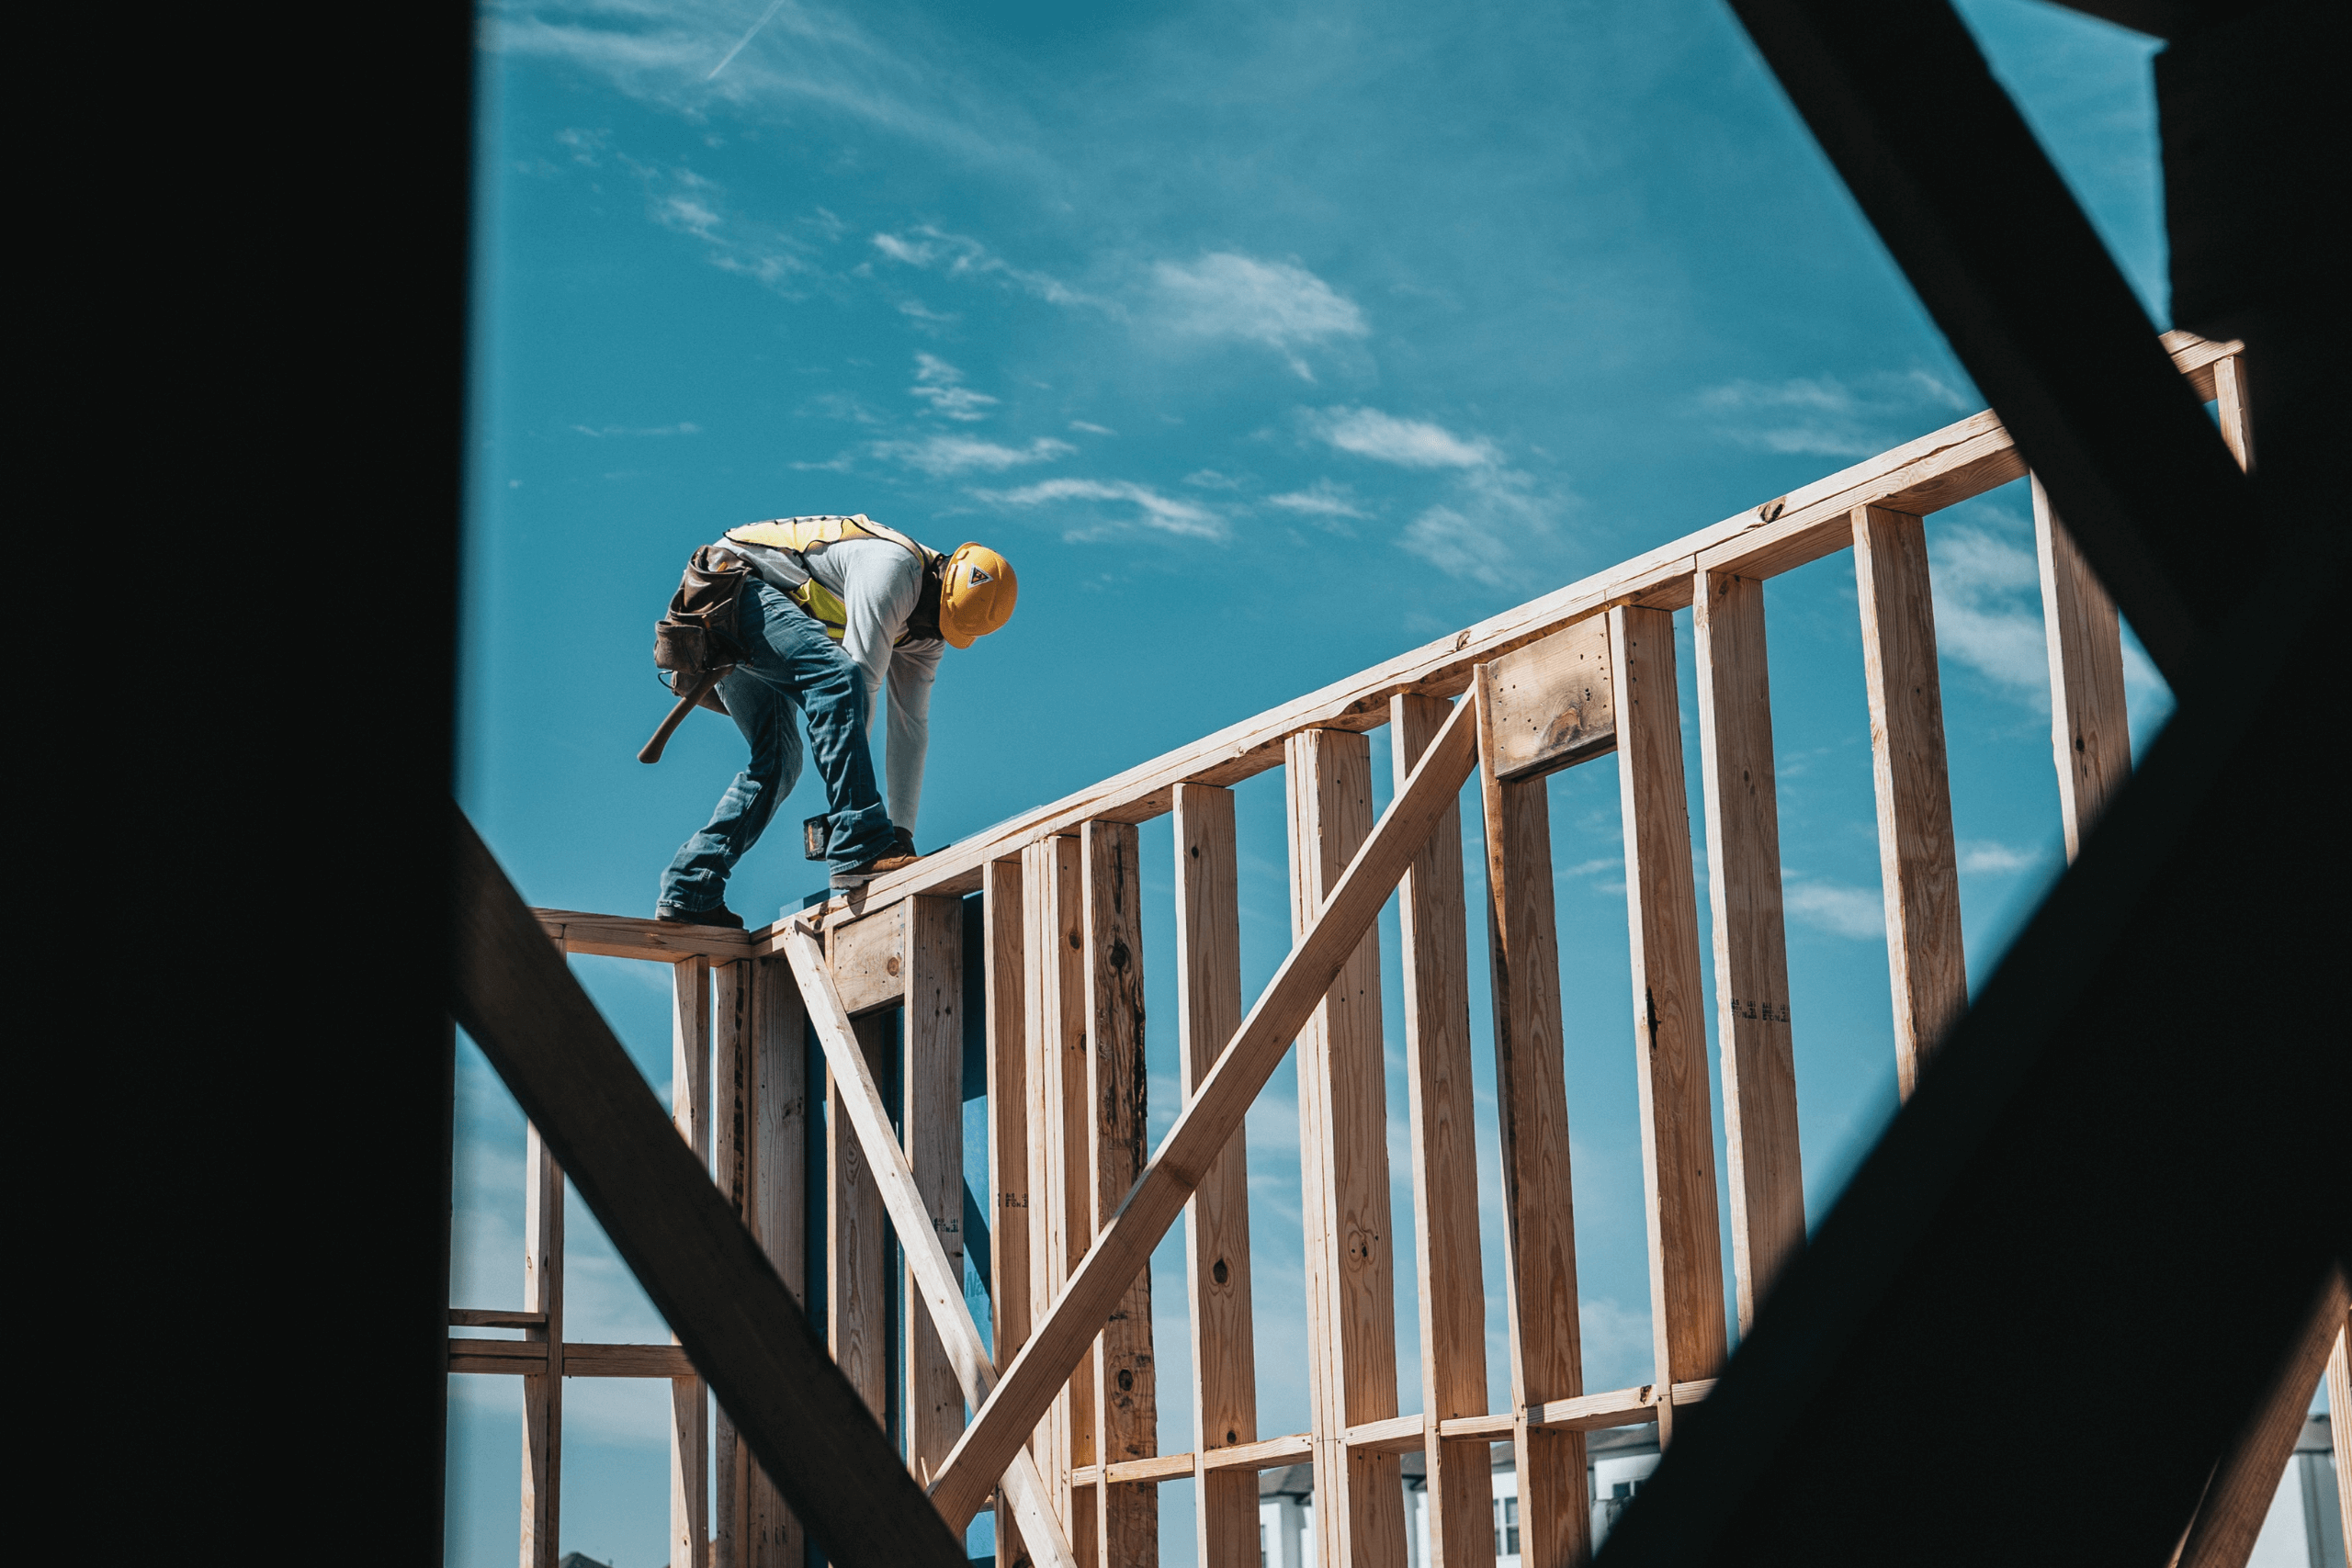 Image of a construction worker